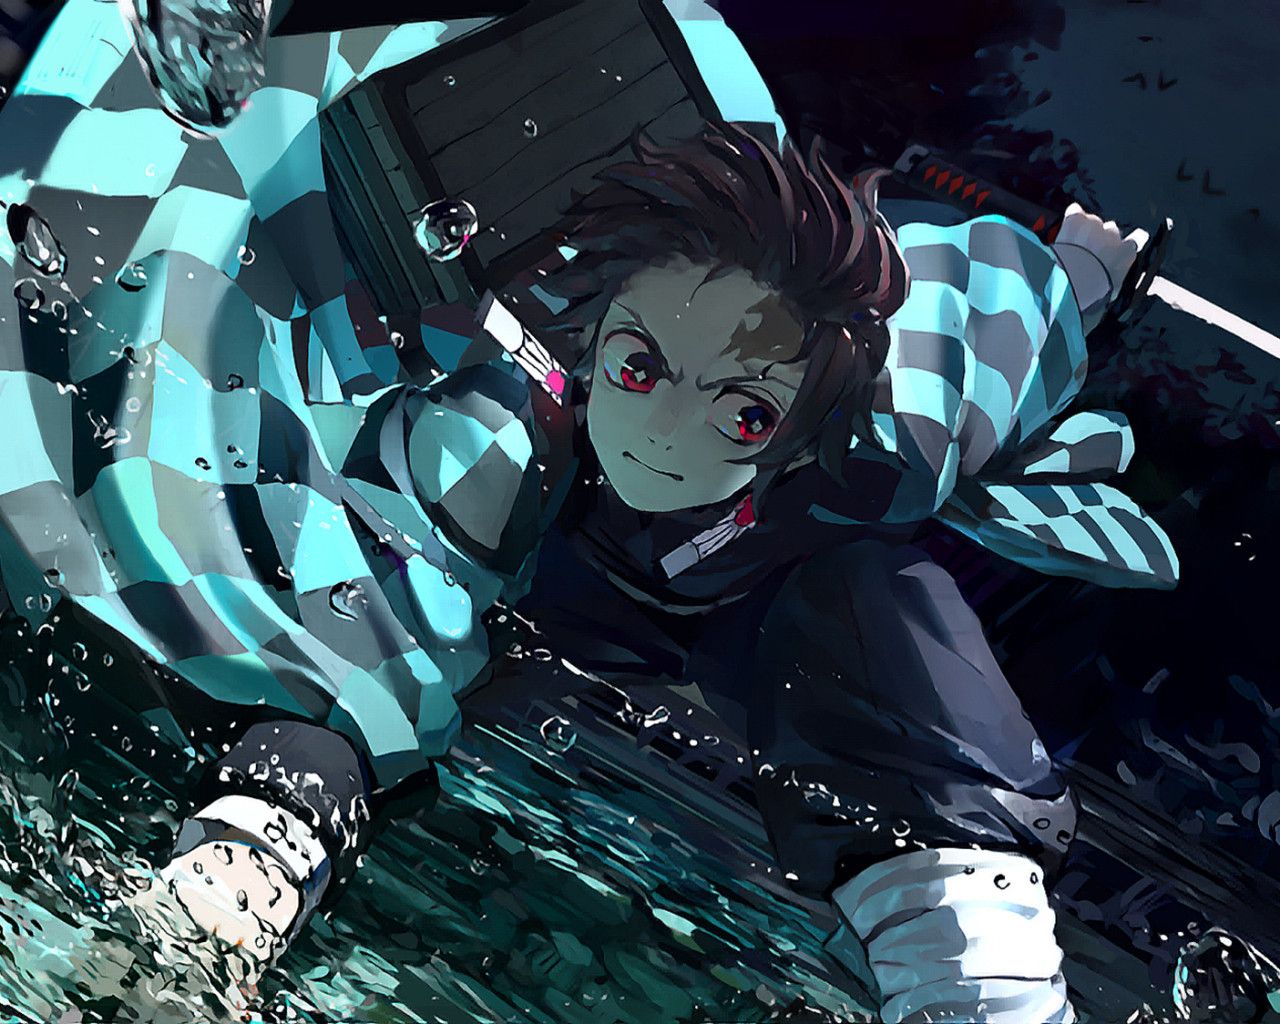 Demon Slayer Kimetsu no Yaiba wallpaper background for desktop, phone, laptop, tablet, and other devices - 1280x1024